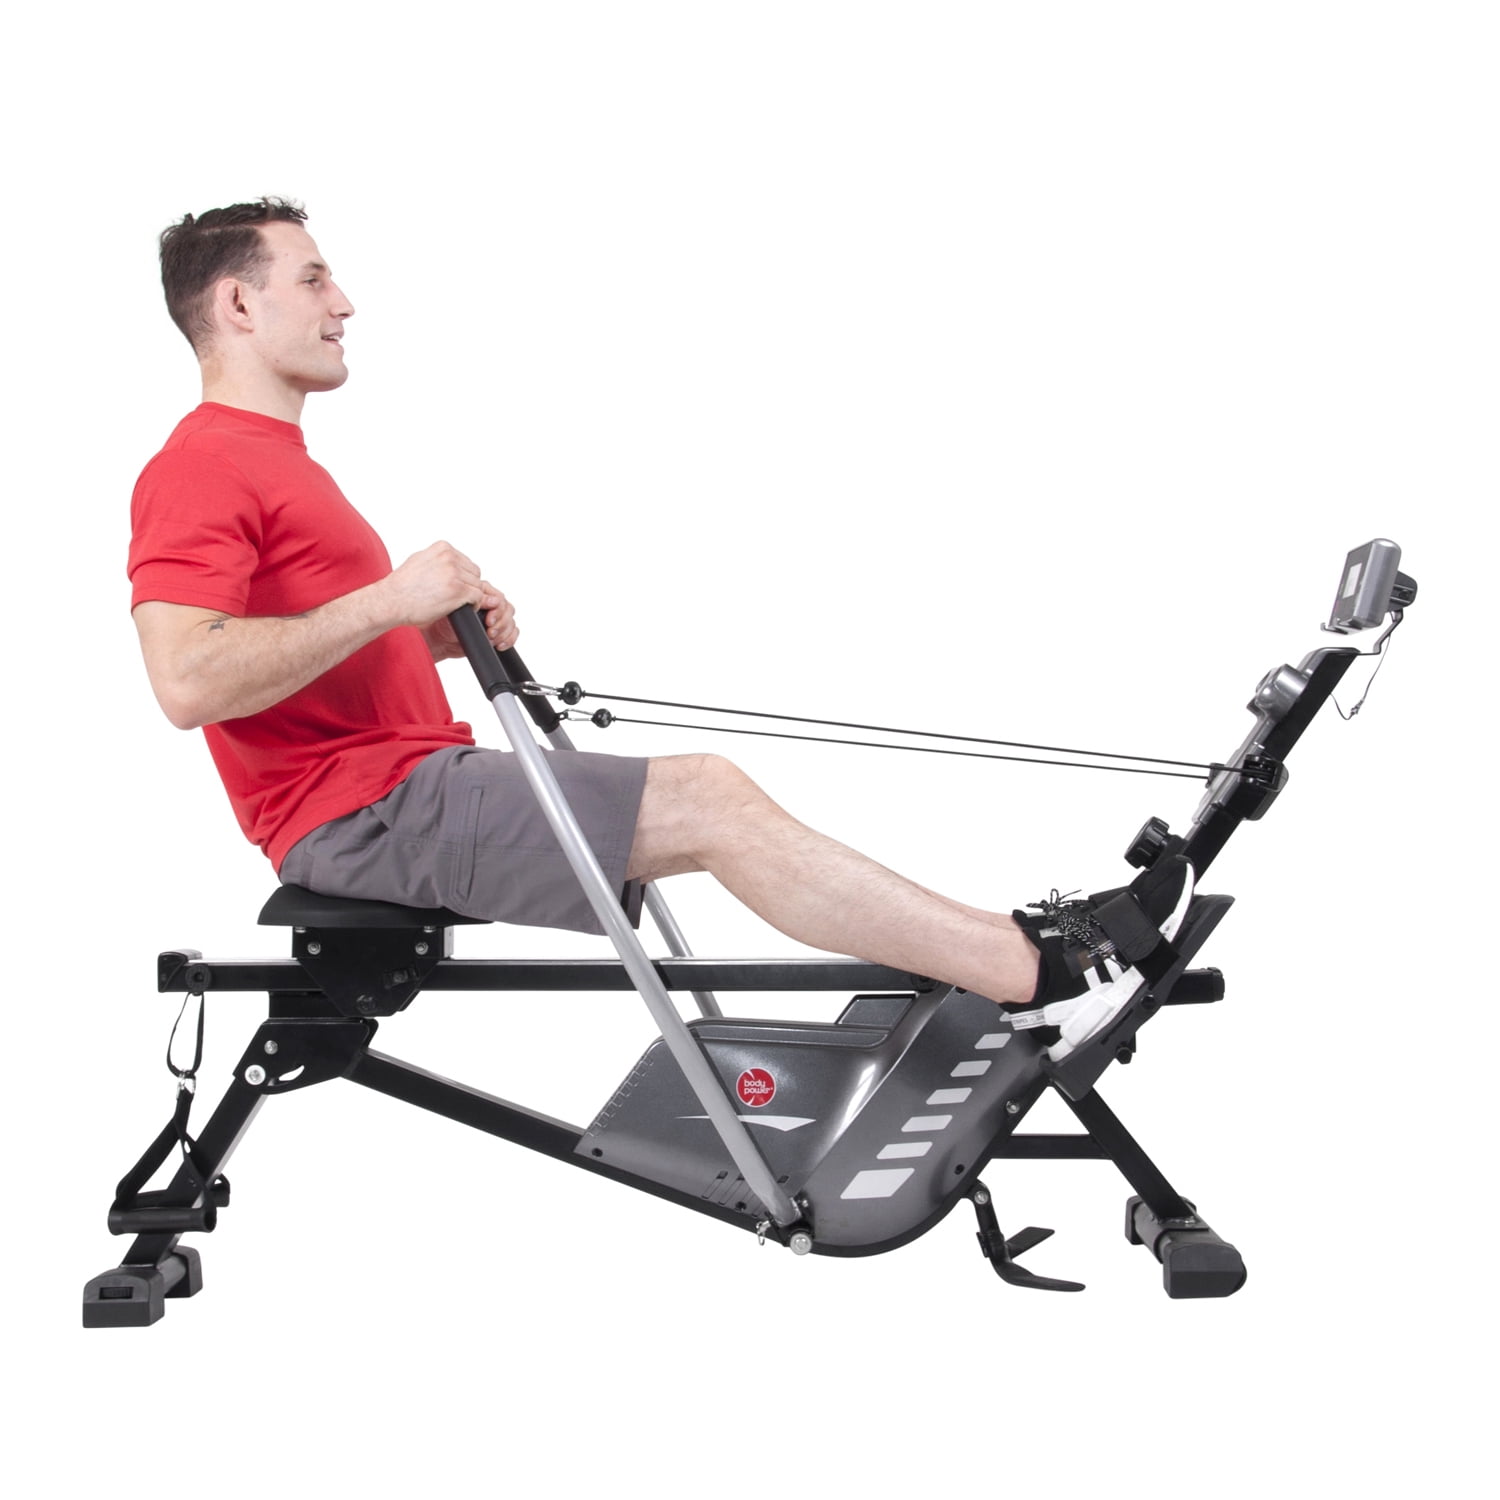 Body Power 3-in-1 Rowing Machine, Rower Exercise Equipment for Home Gym ...